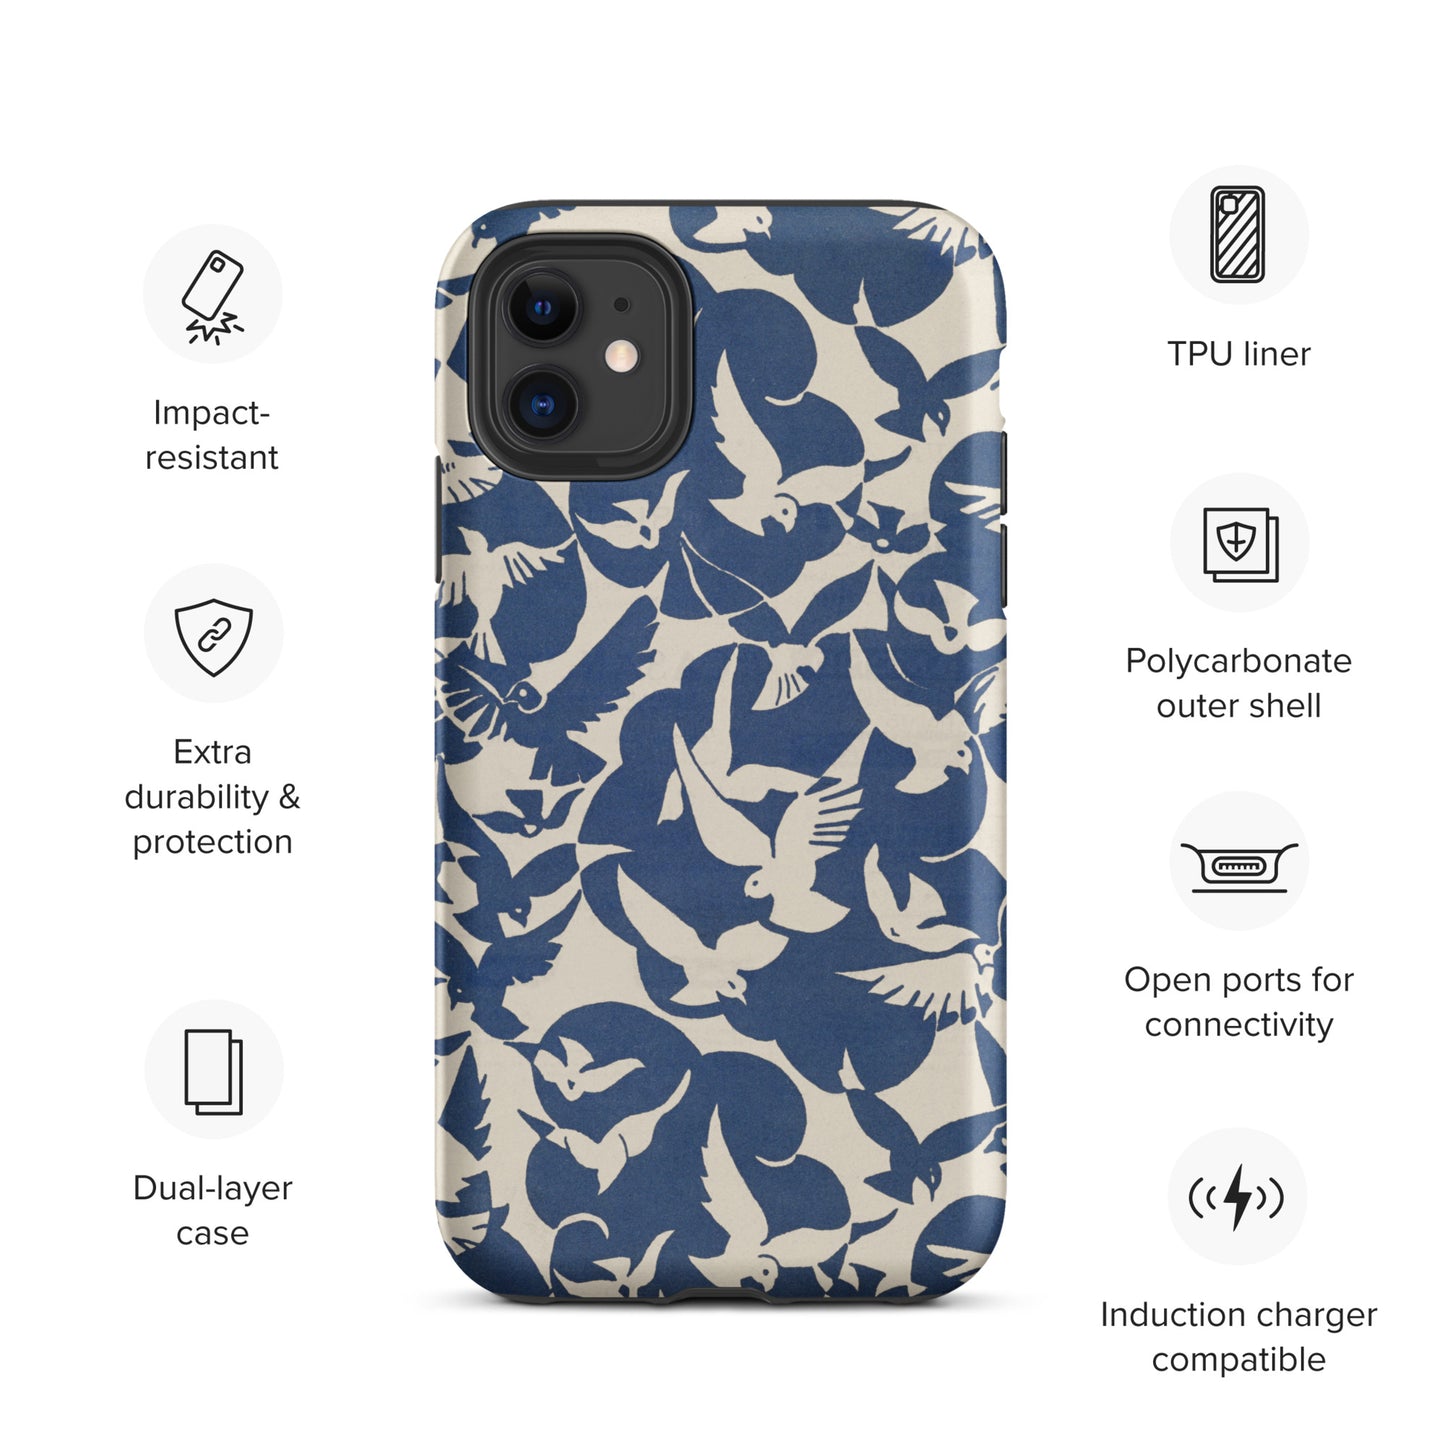 Pigeons in Rijksmuseum White and Blue Pattern - Tough iPhone case